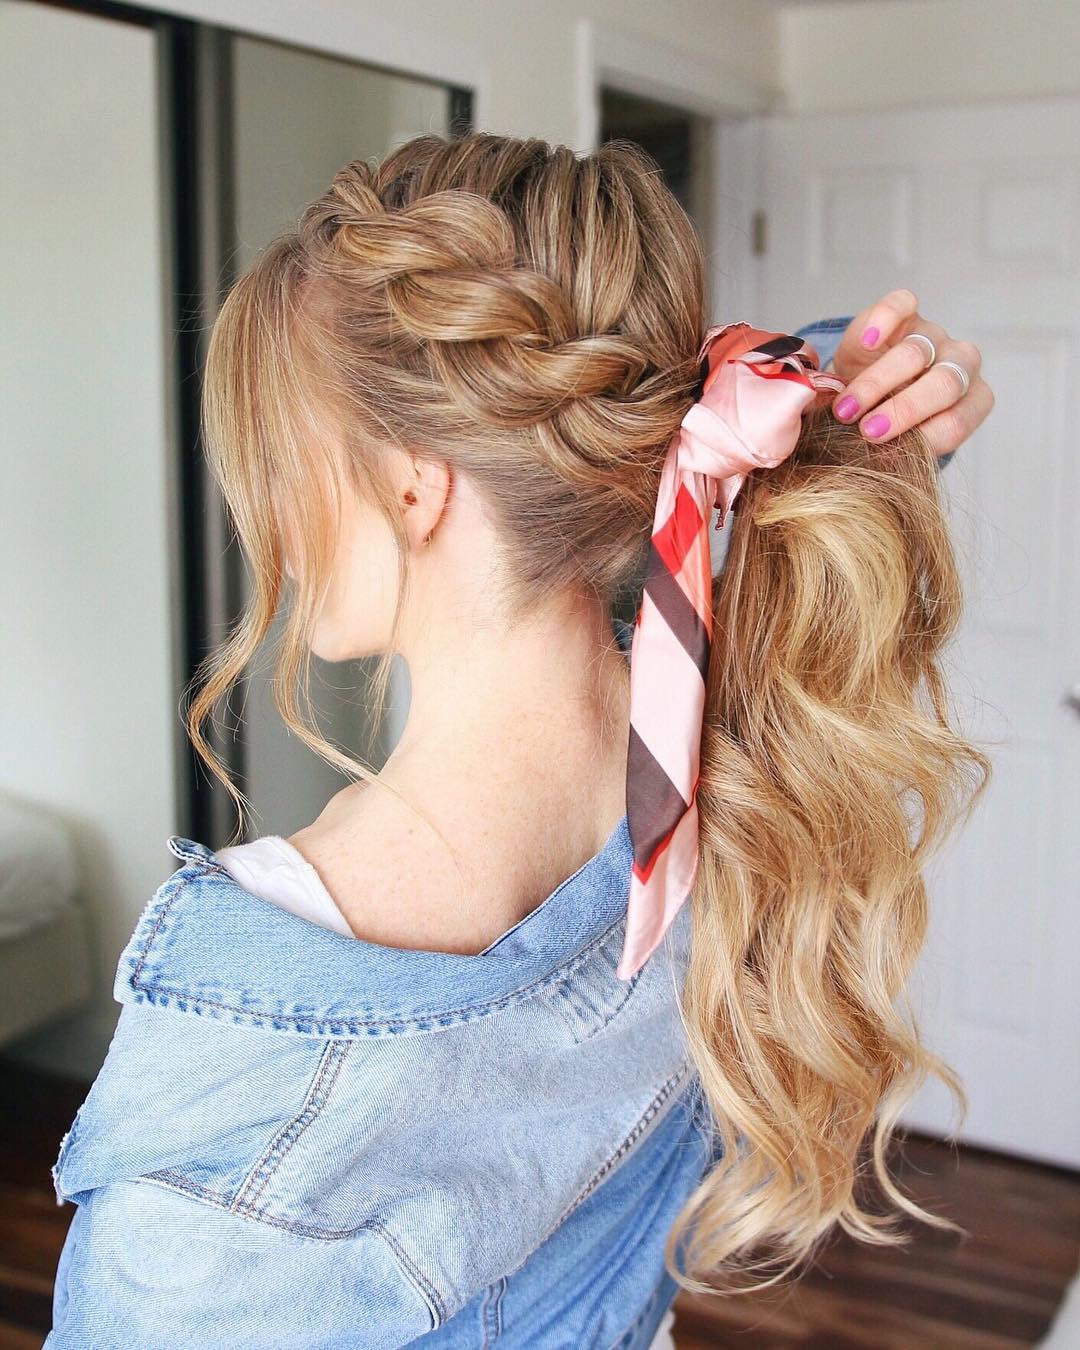 Best Super Cute and Cool Ponytail Hairstyles, Long Hair Styles Ideas